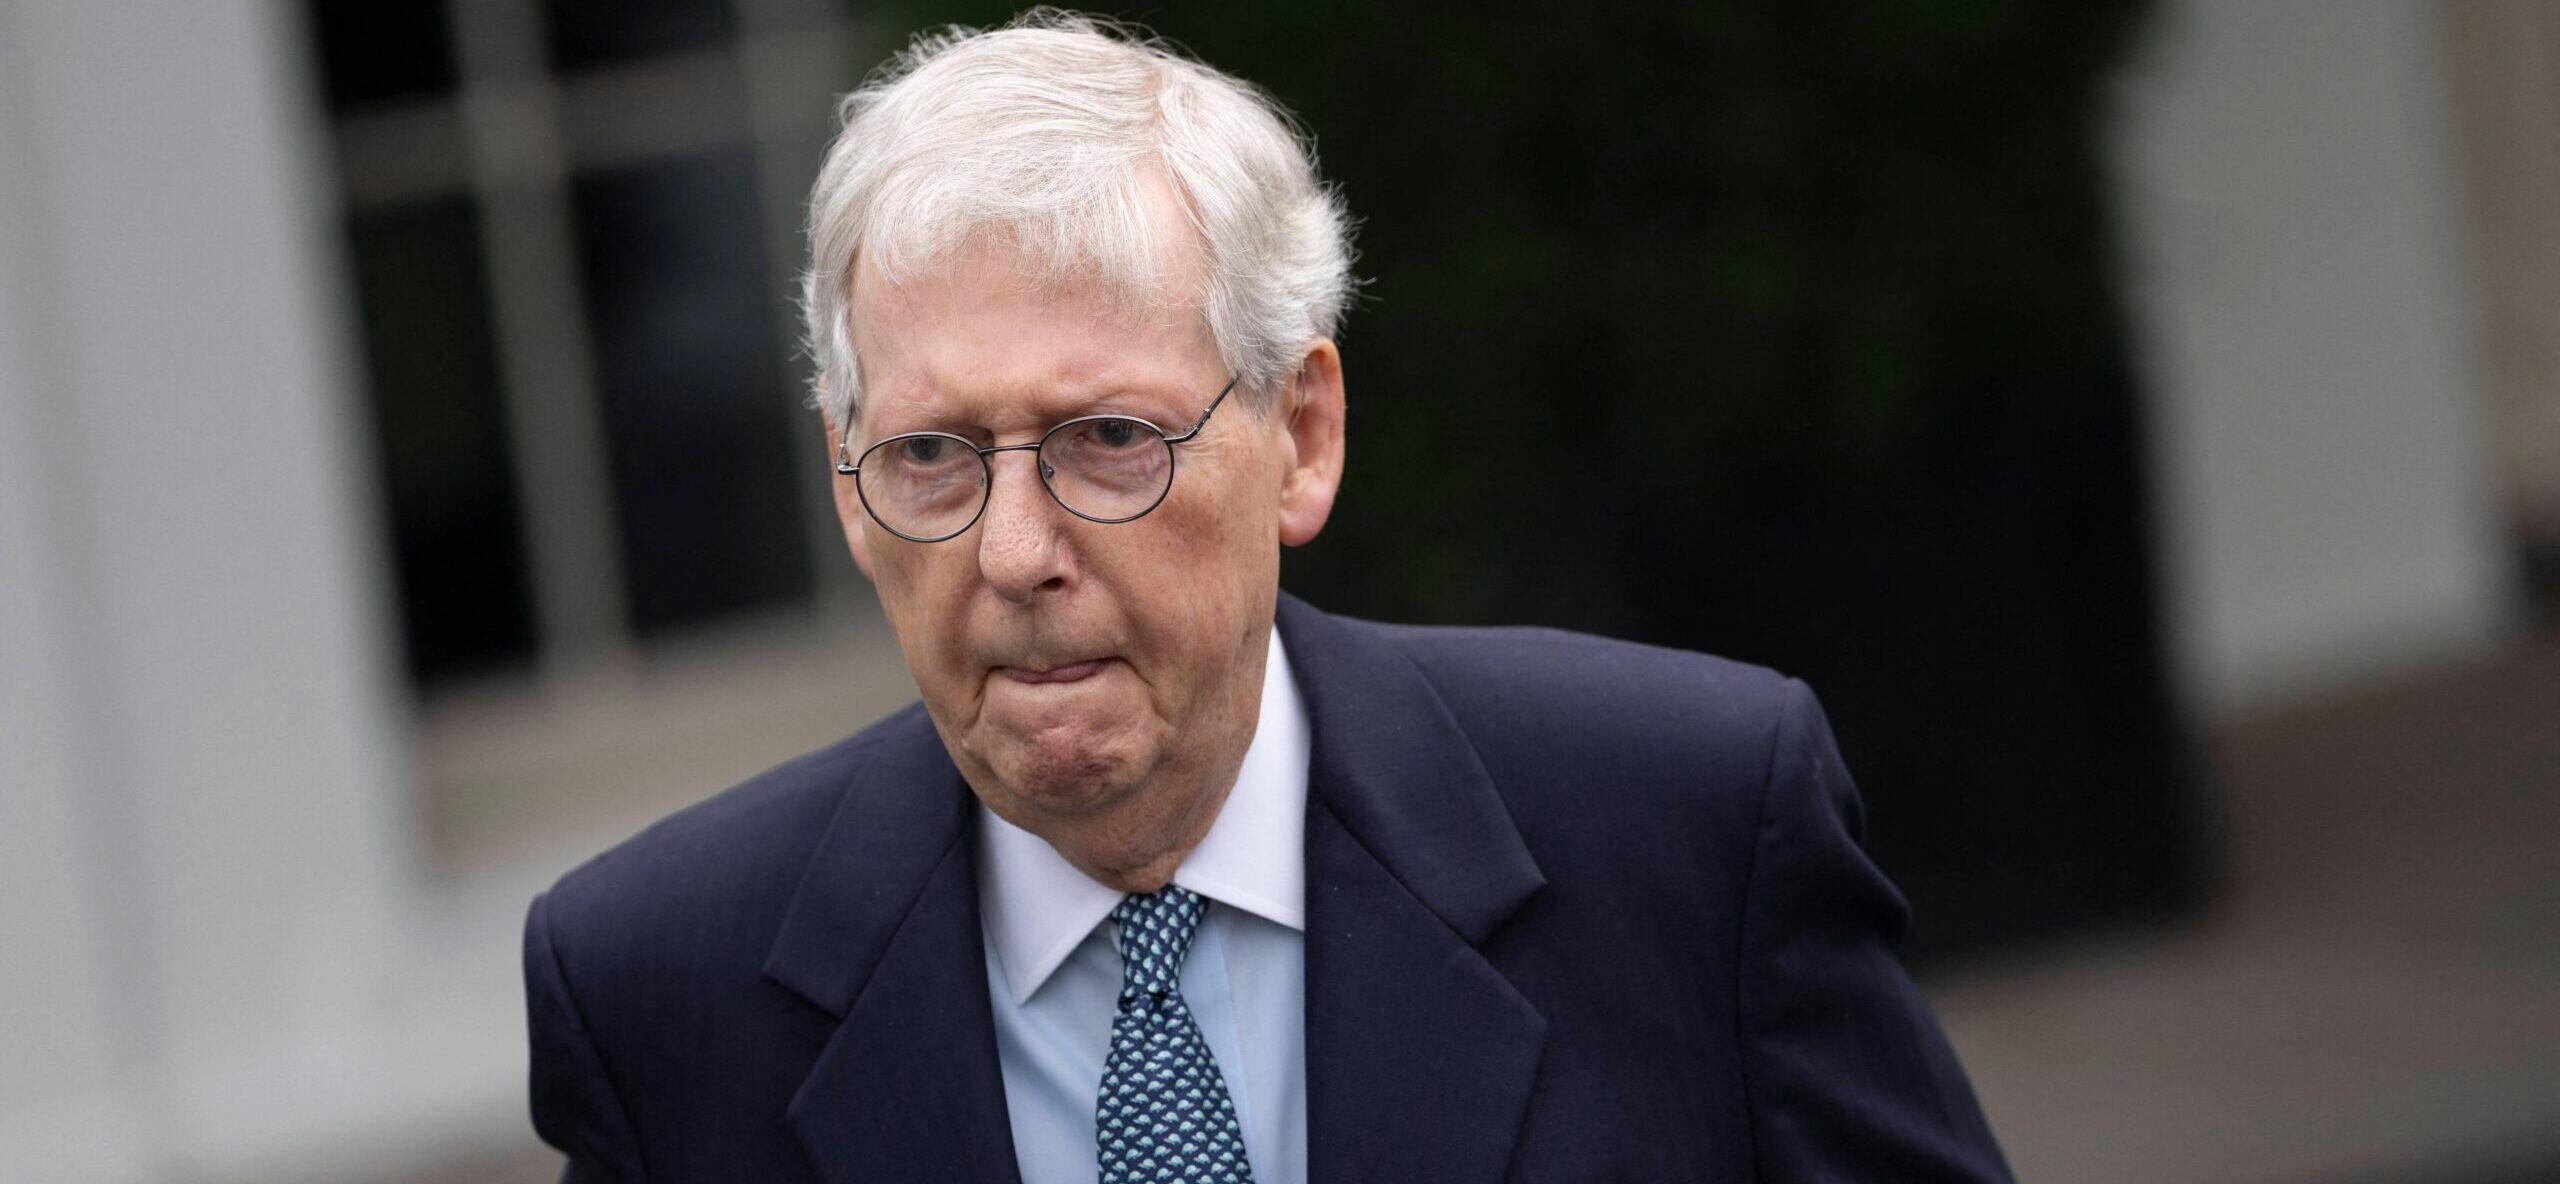 Mitch McConnell Claims He Is ‘Fine’ After Freezing Mid-Speech During Press Conference